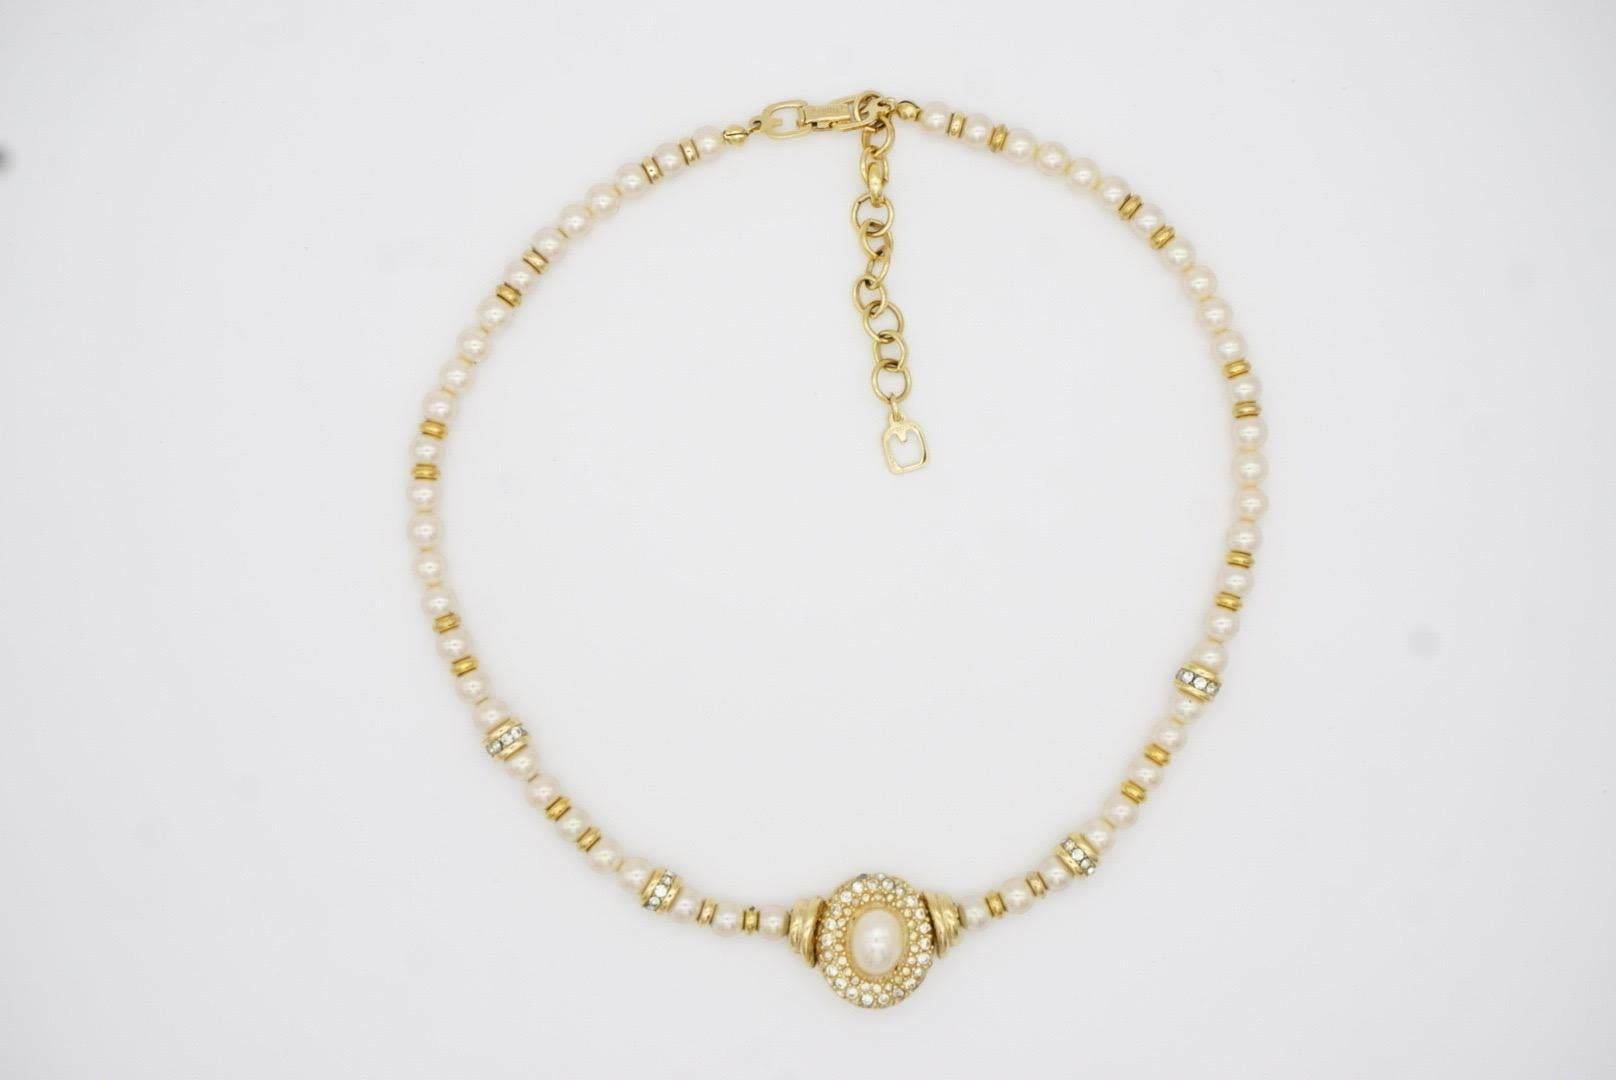 Christian Dior GROSSE 1960s White Oval Crystals Pendant Beaded Pearls Necklace For Sale 7